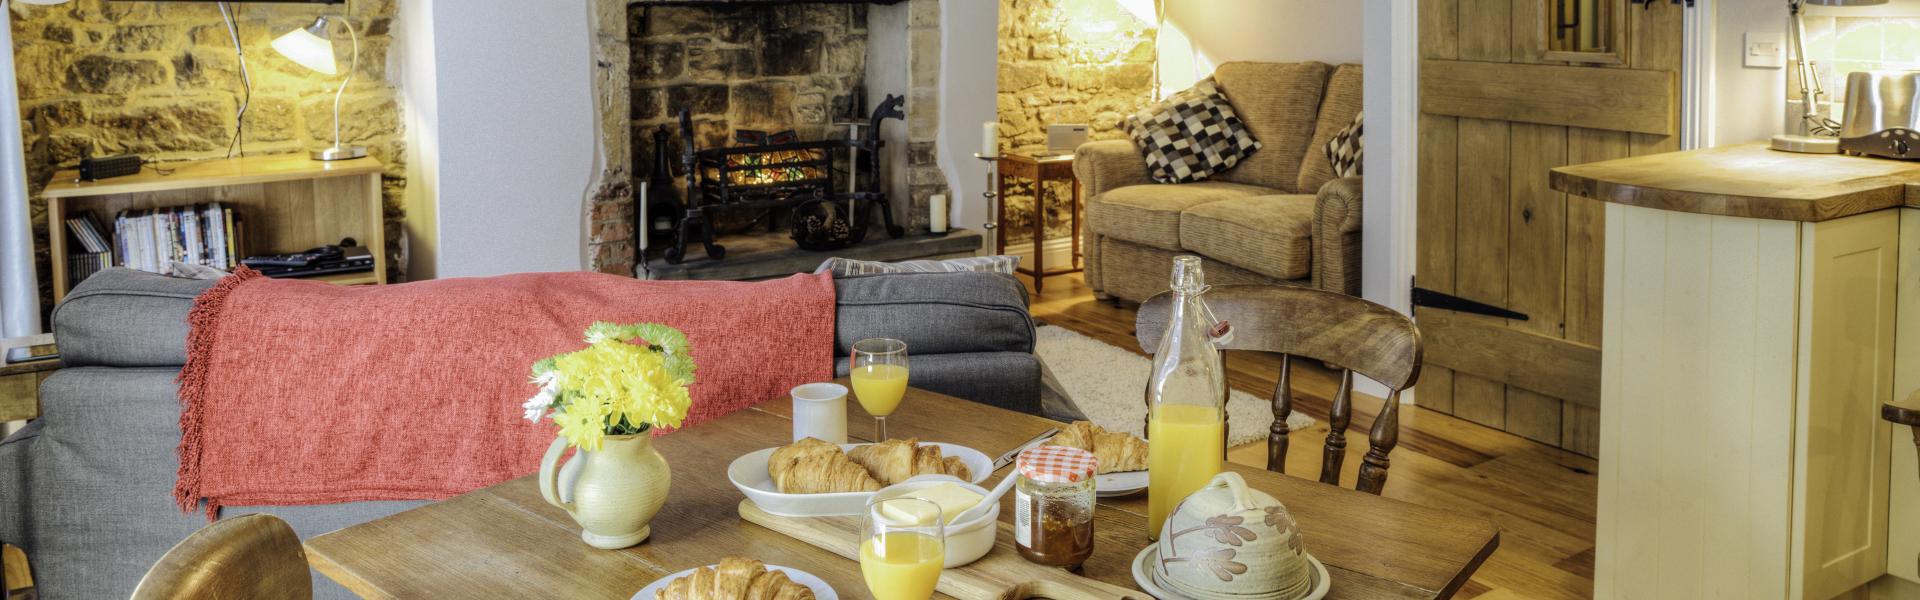 Bed and Breakfast Accommodation in Wales - HomeToGo